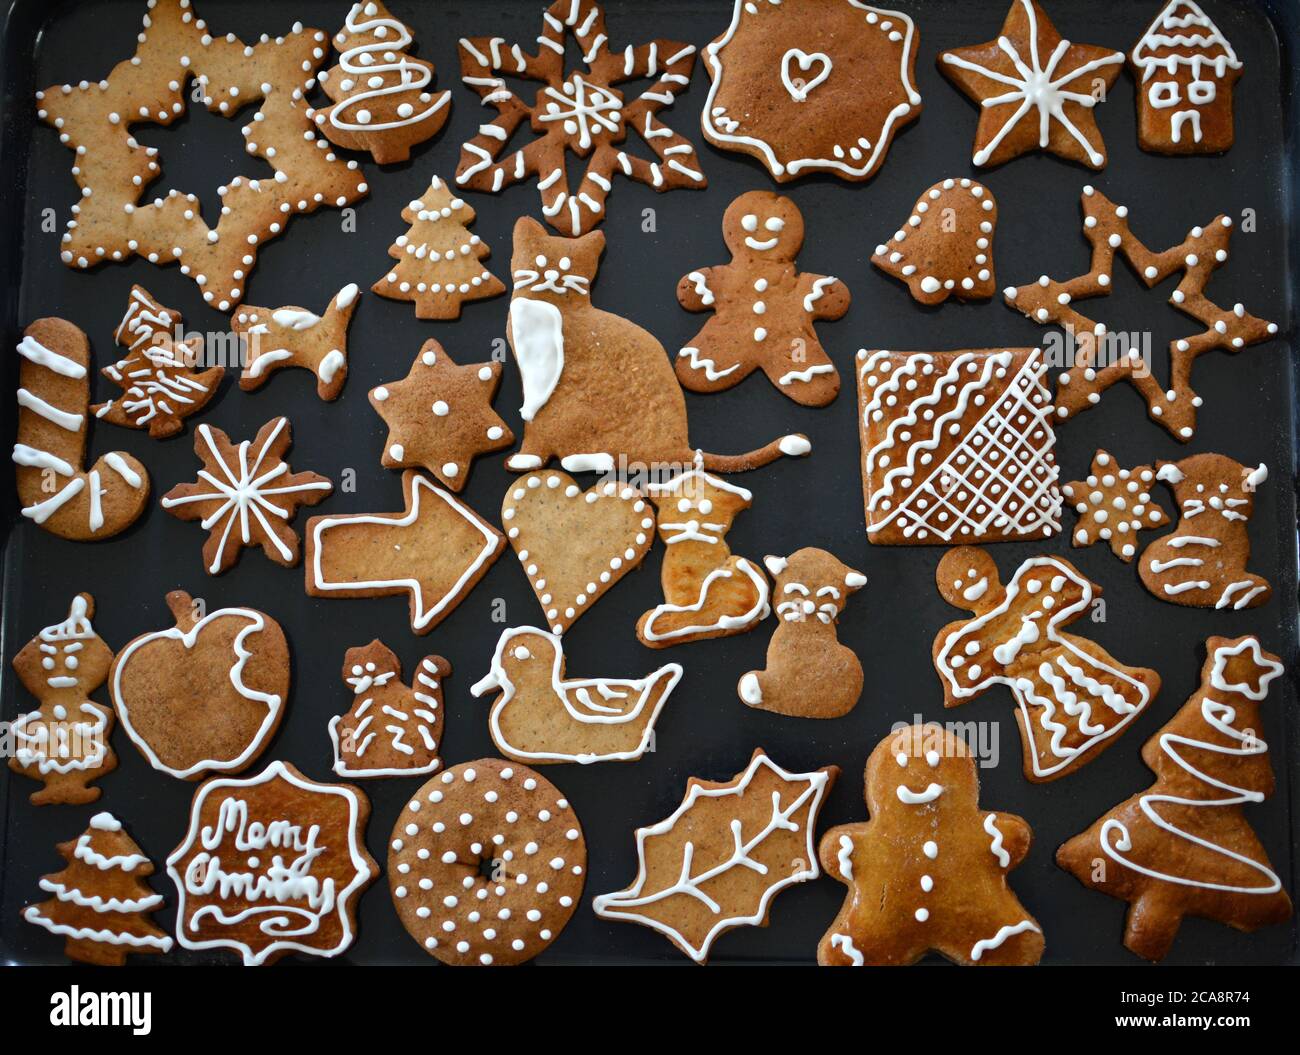 Gingerbread cookies decorated with royal icing on baking sheet ...